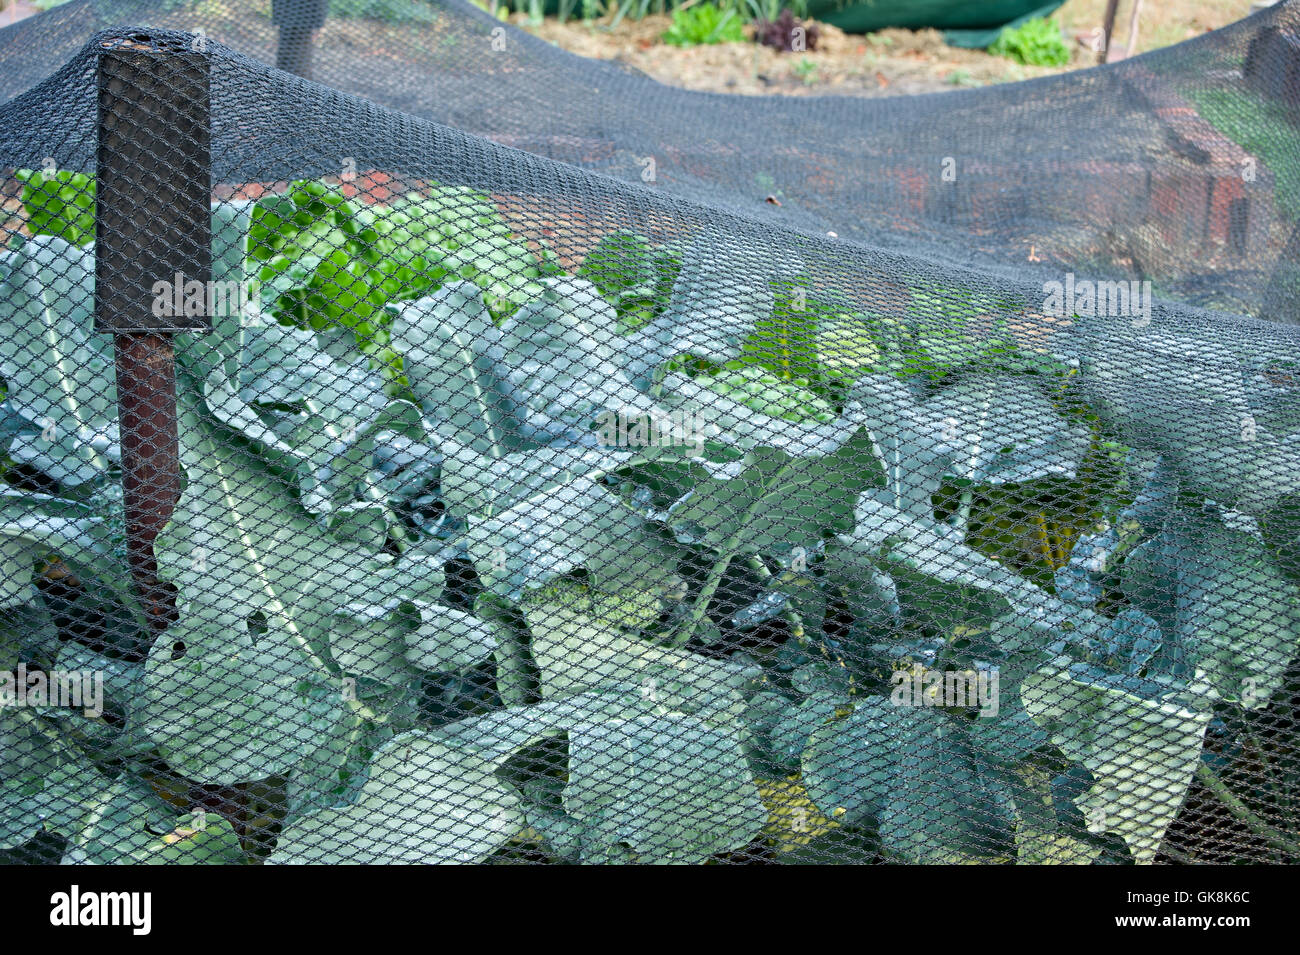 Butterfly netting covering brassicas to prevent cabbage white butterfly damage Stock Photo